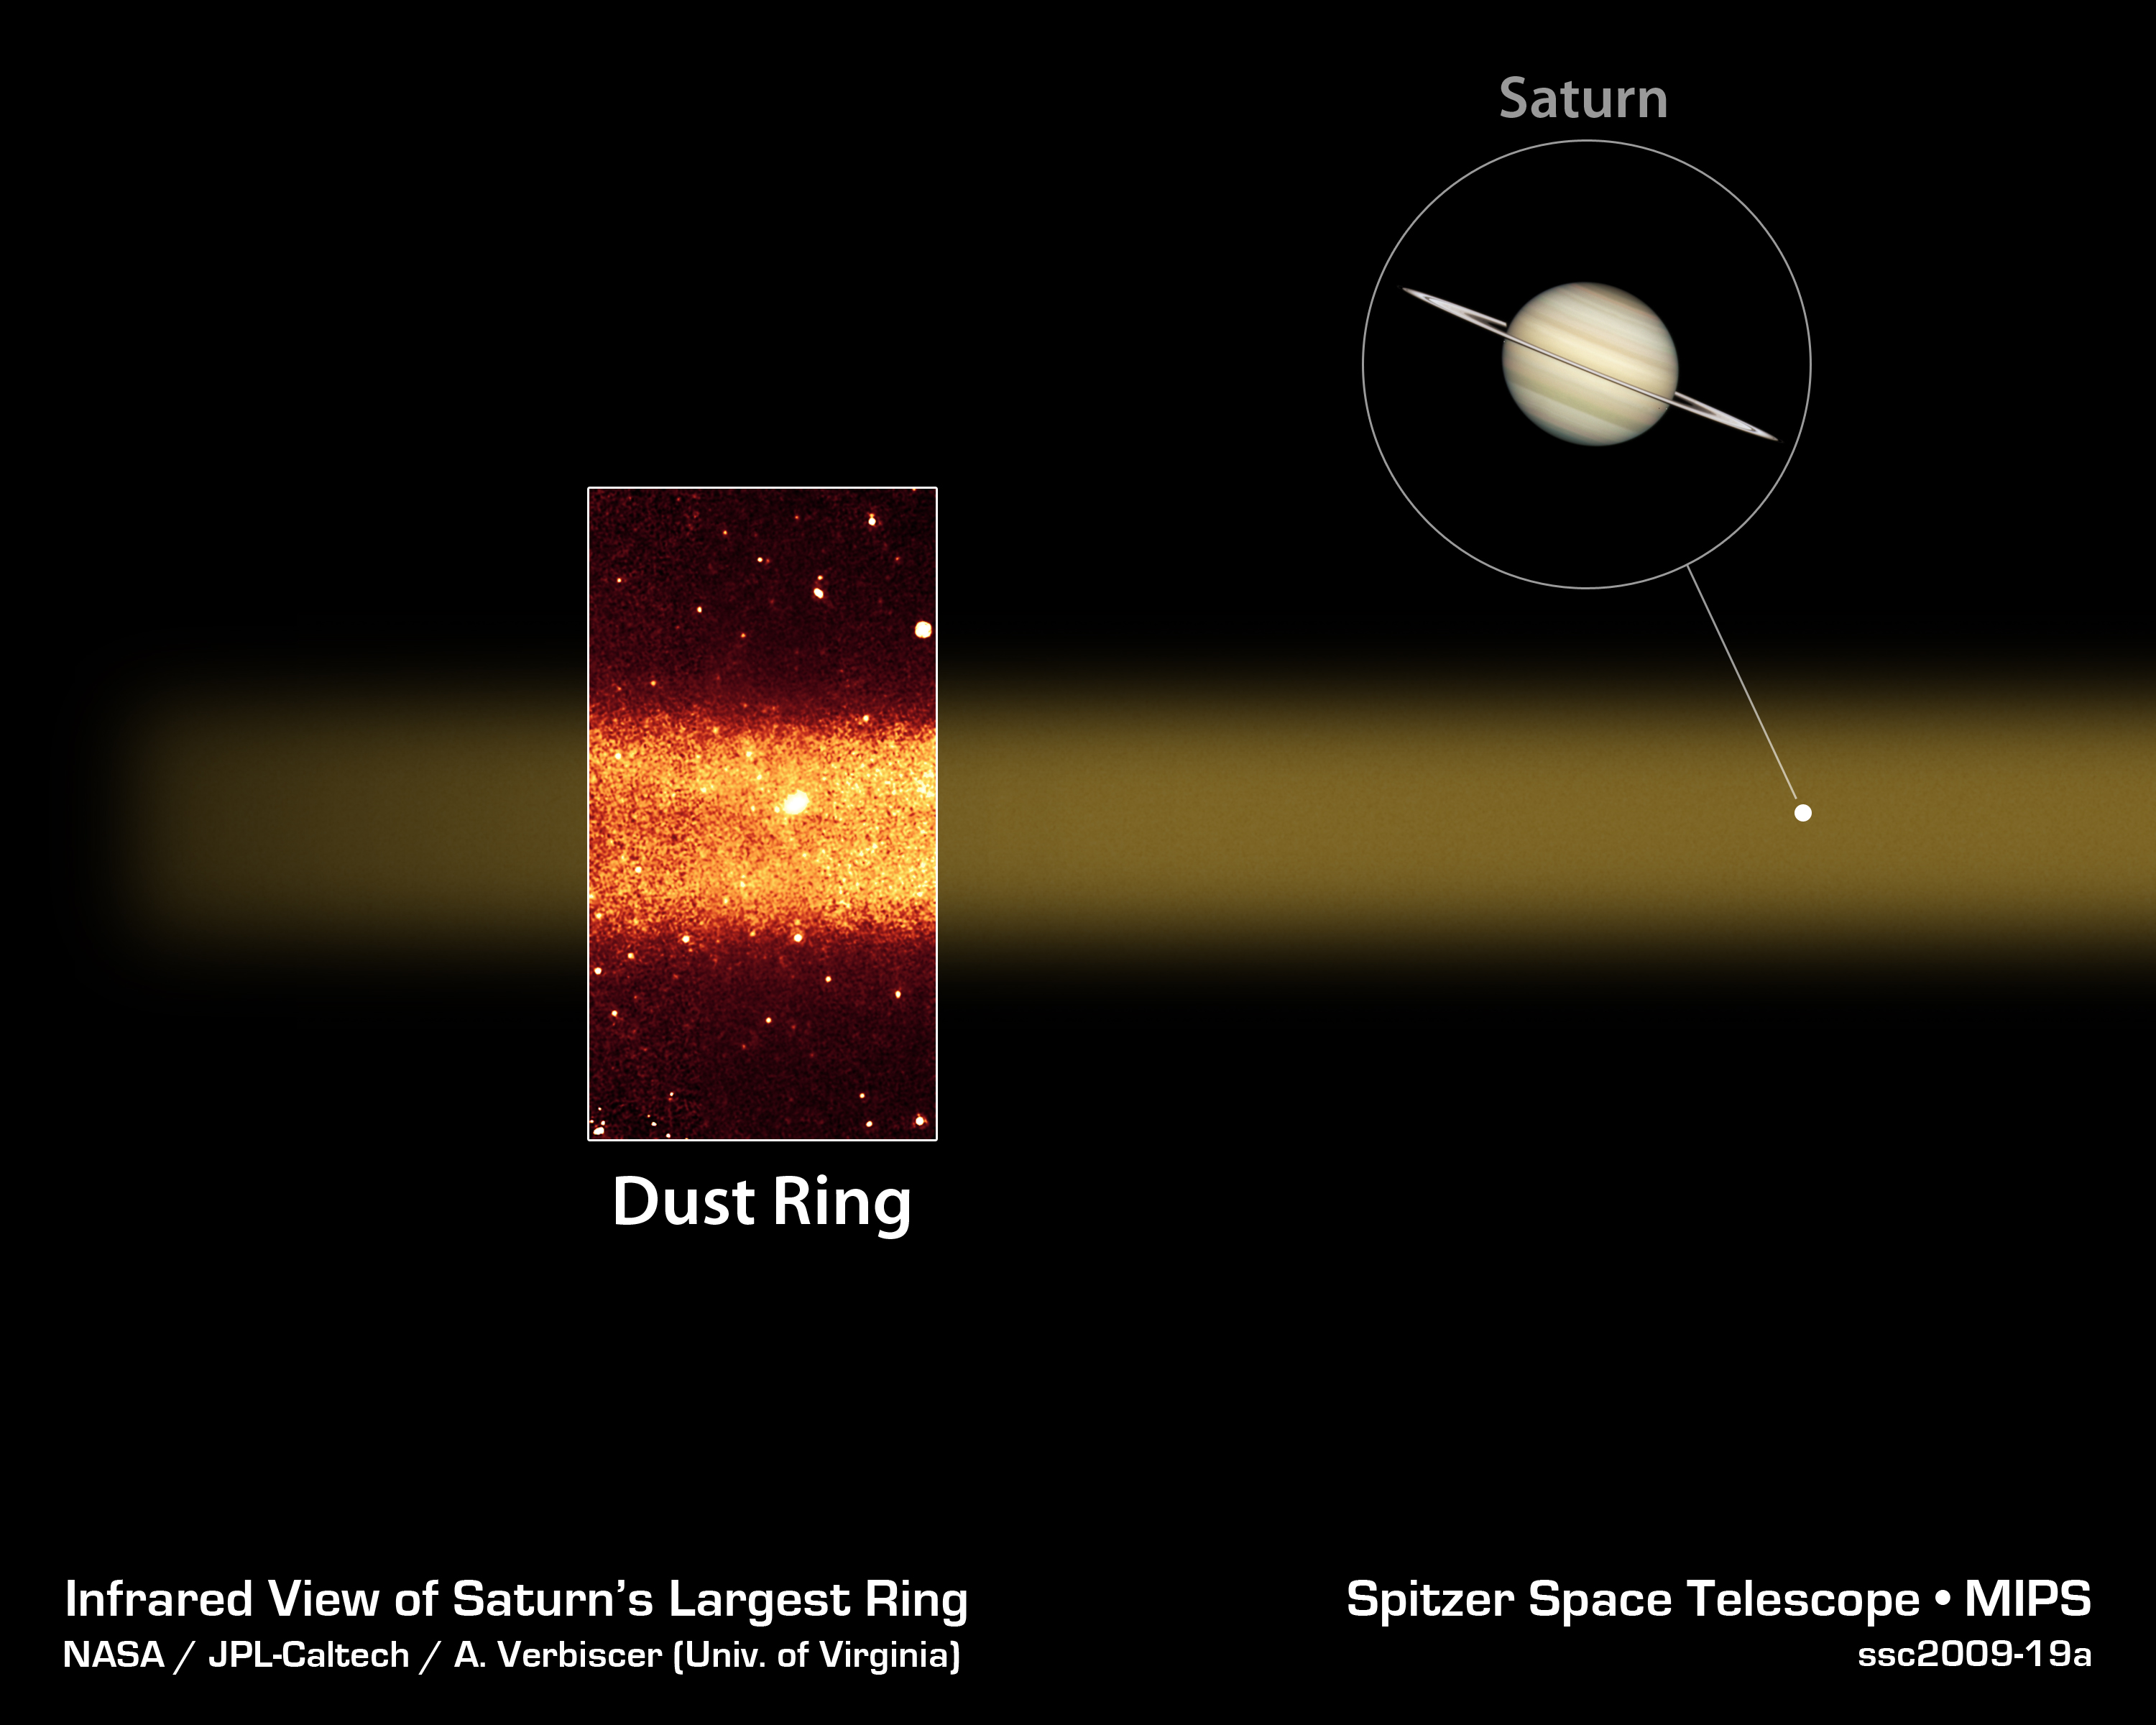 Giant Dust Ring Discovered Around Saturn